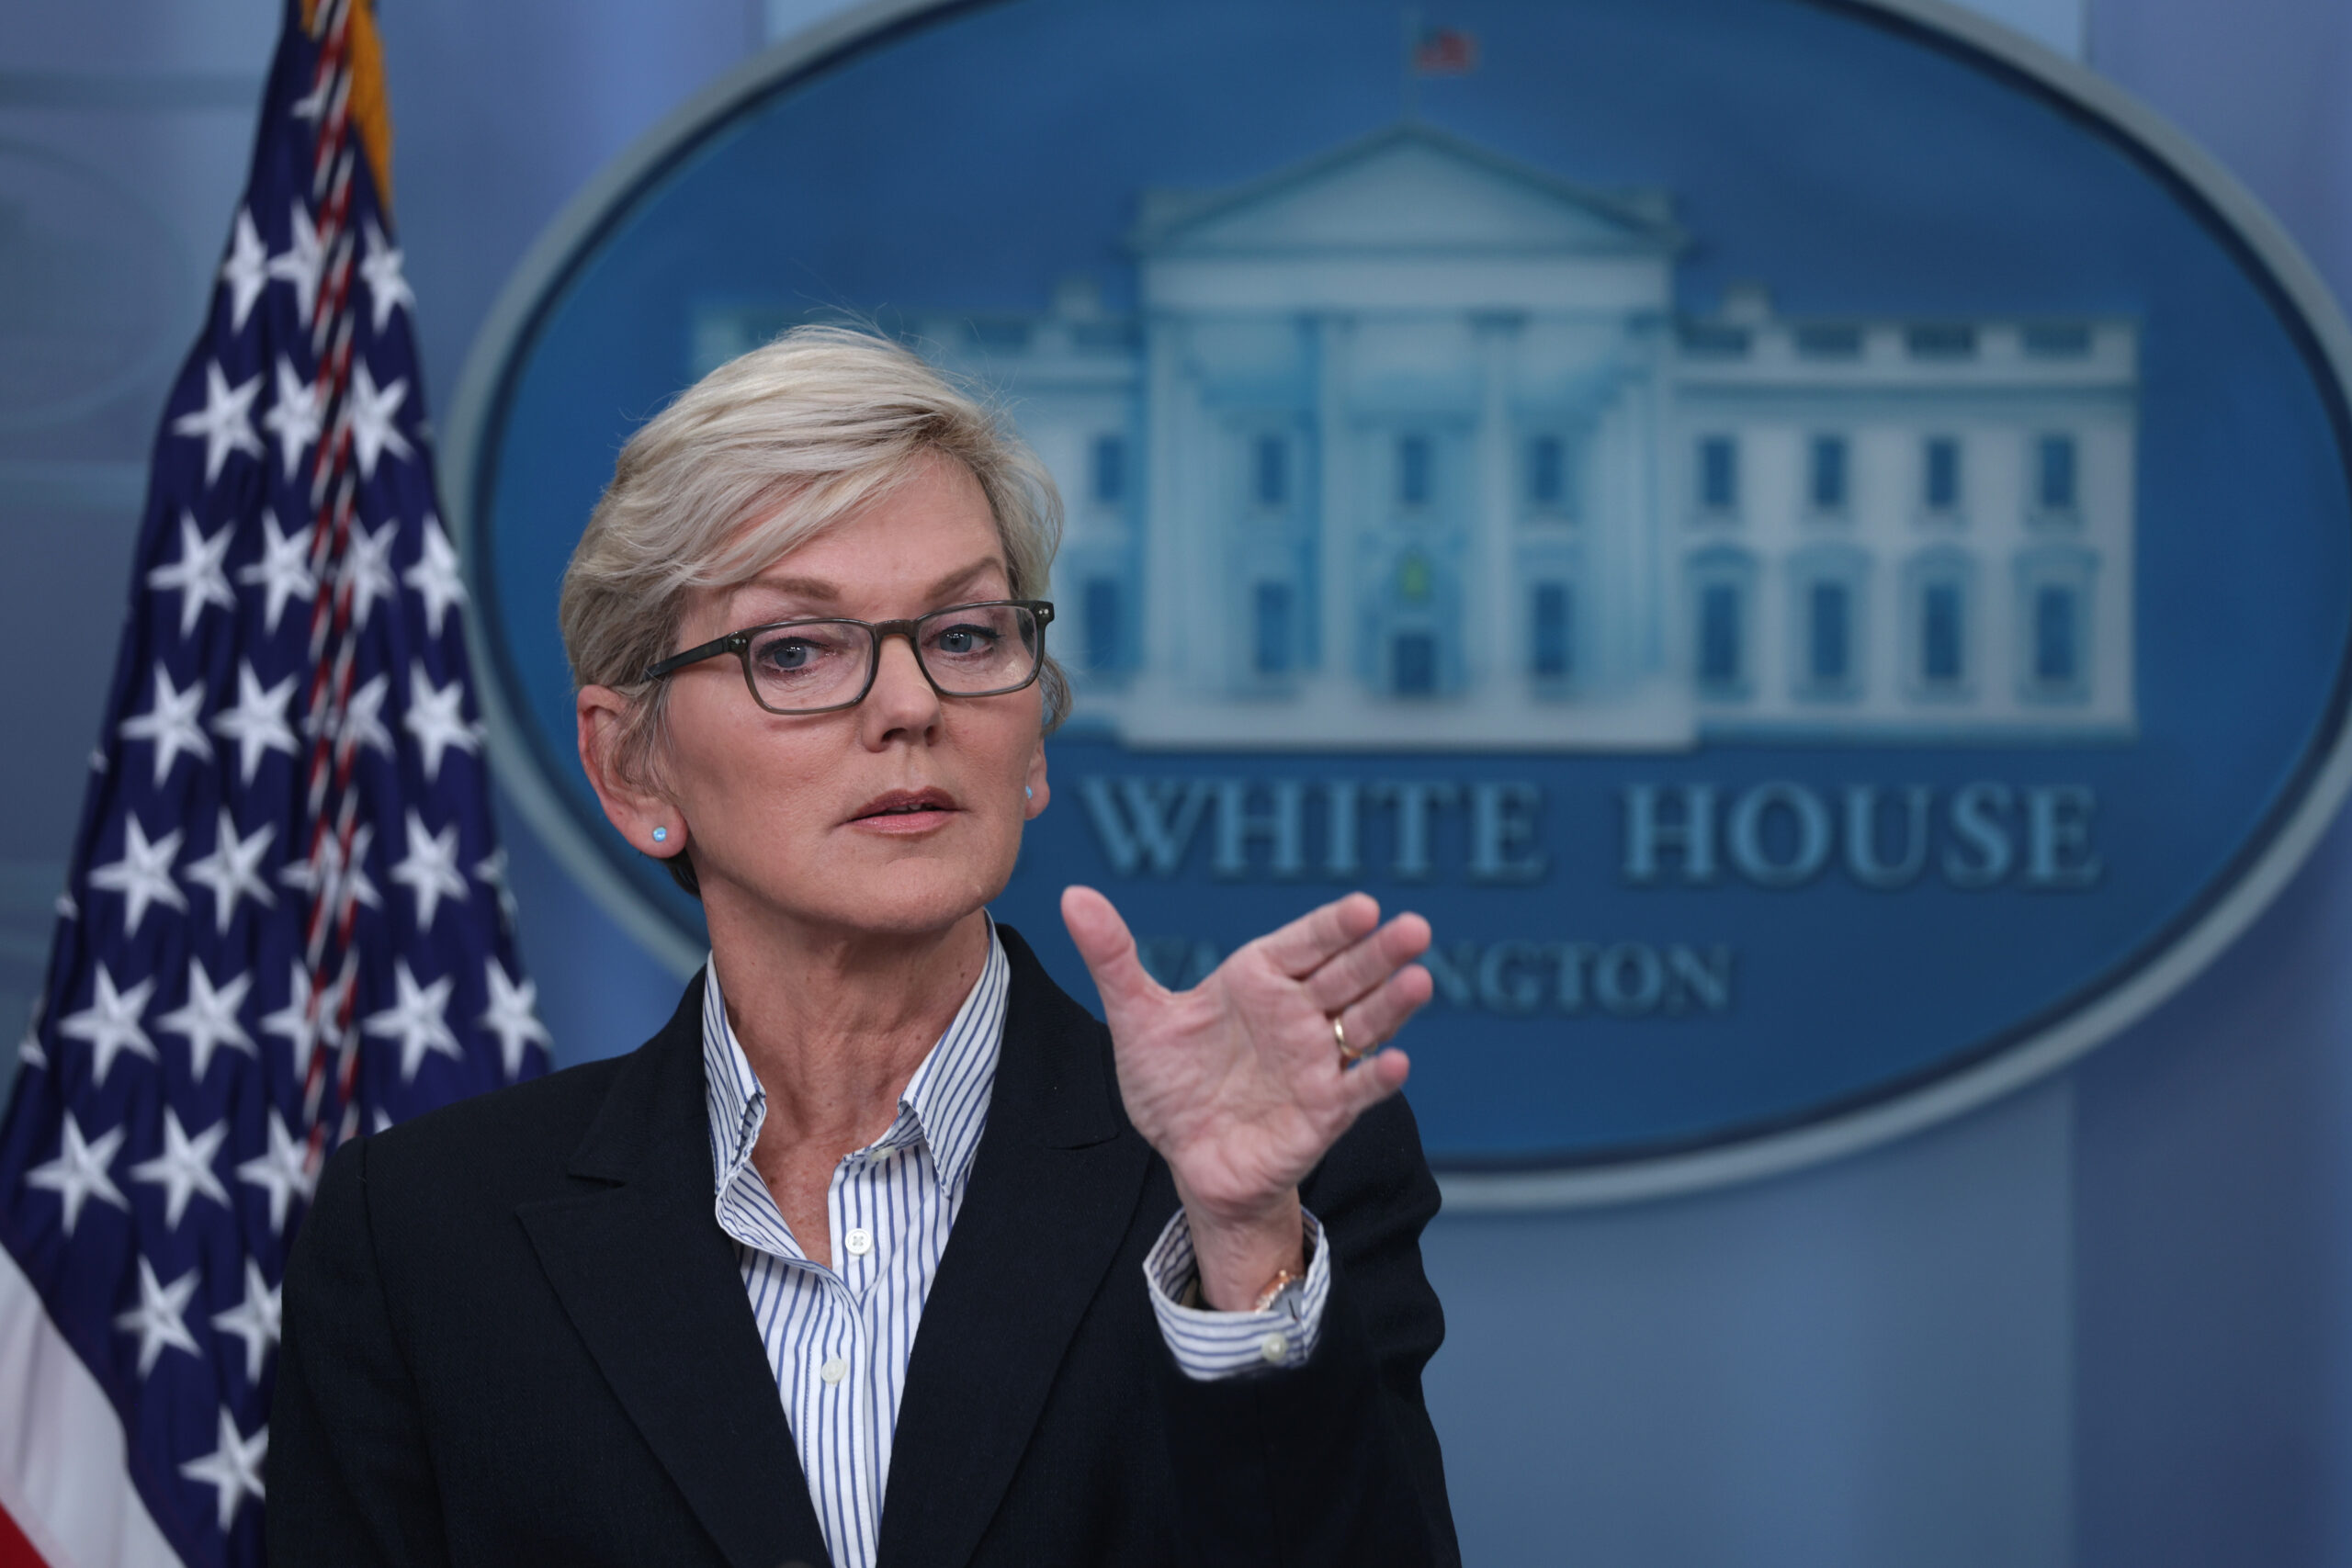 Energy Secretary Granholm Admits She Has A Gas Stove While Justifying Push To Regulate Appliances